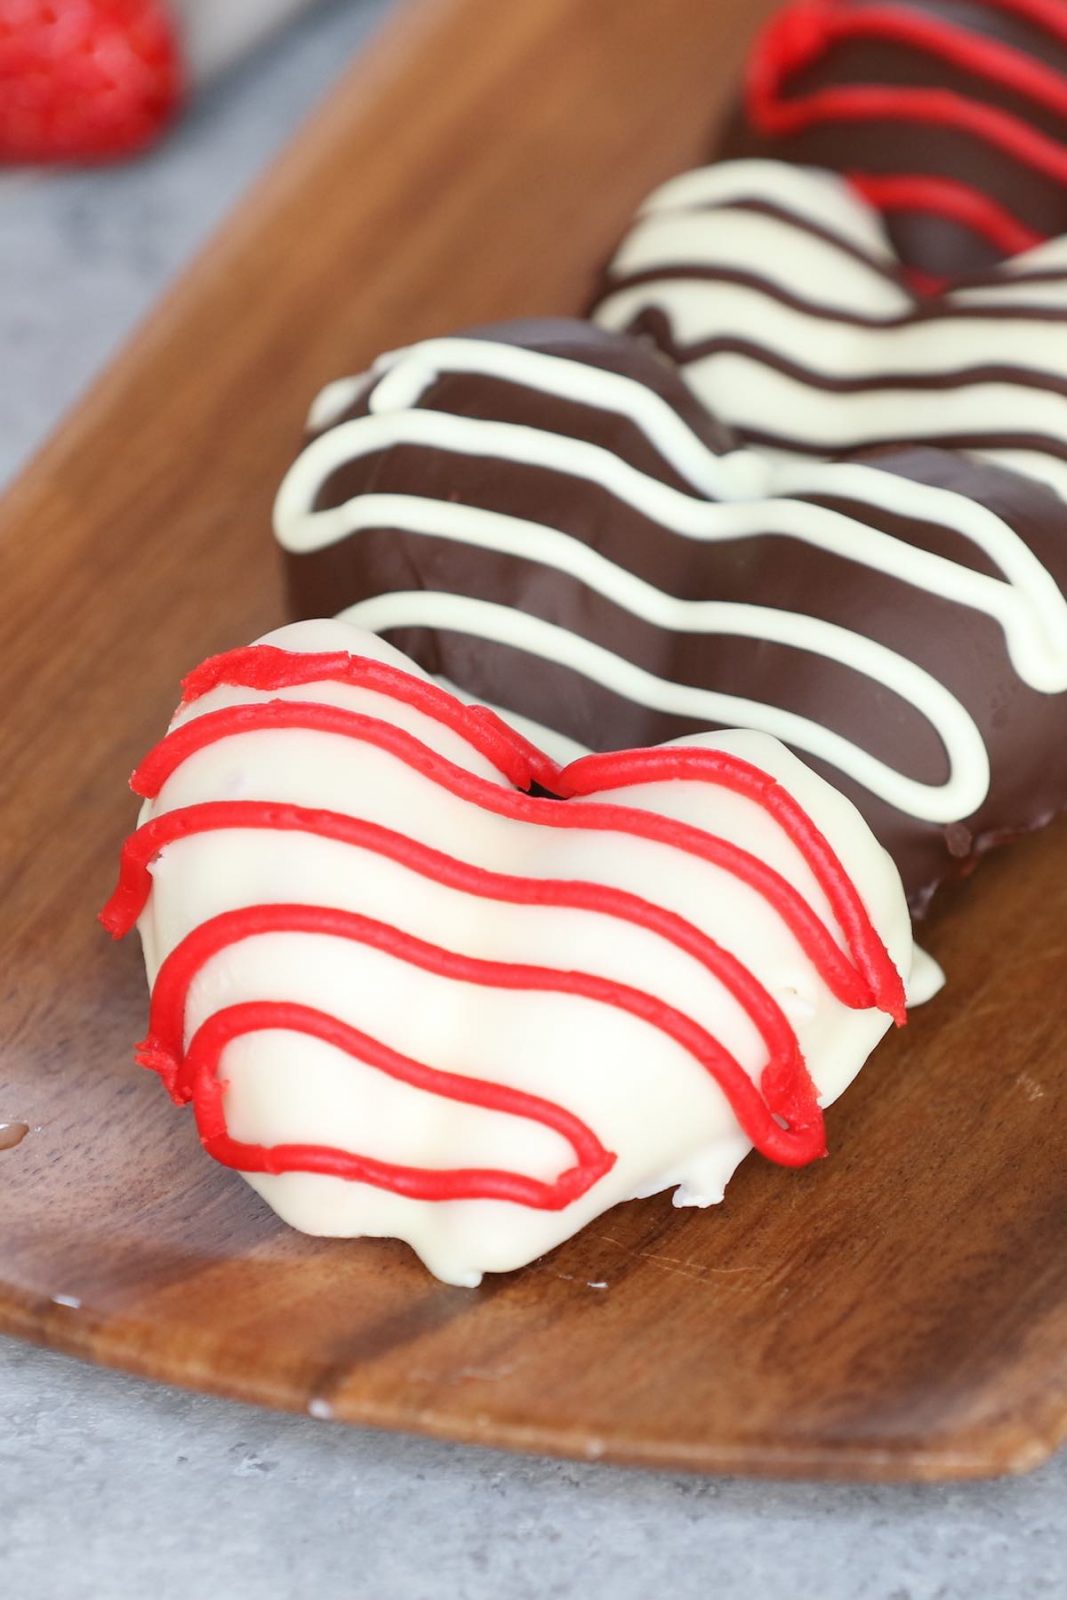 Heart-shaped chocolate covered strawberries.